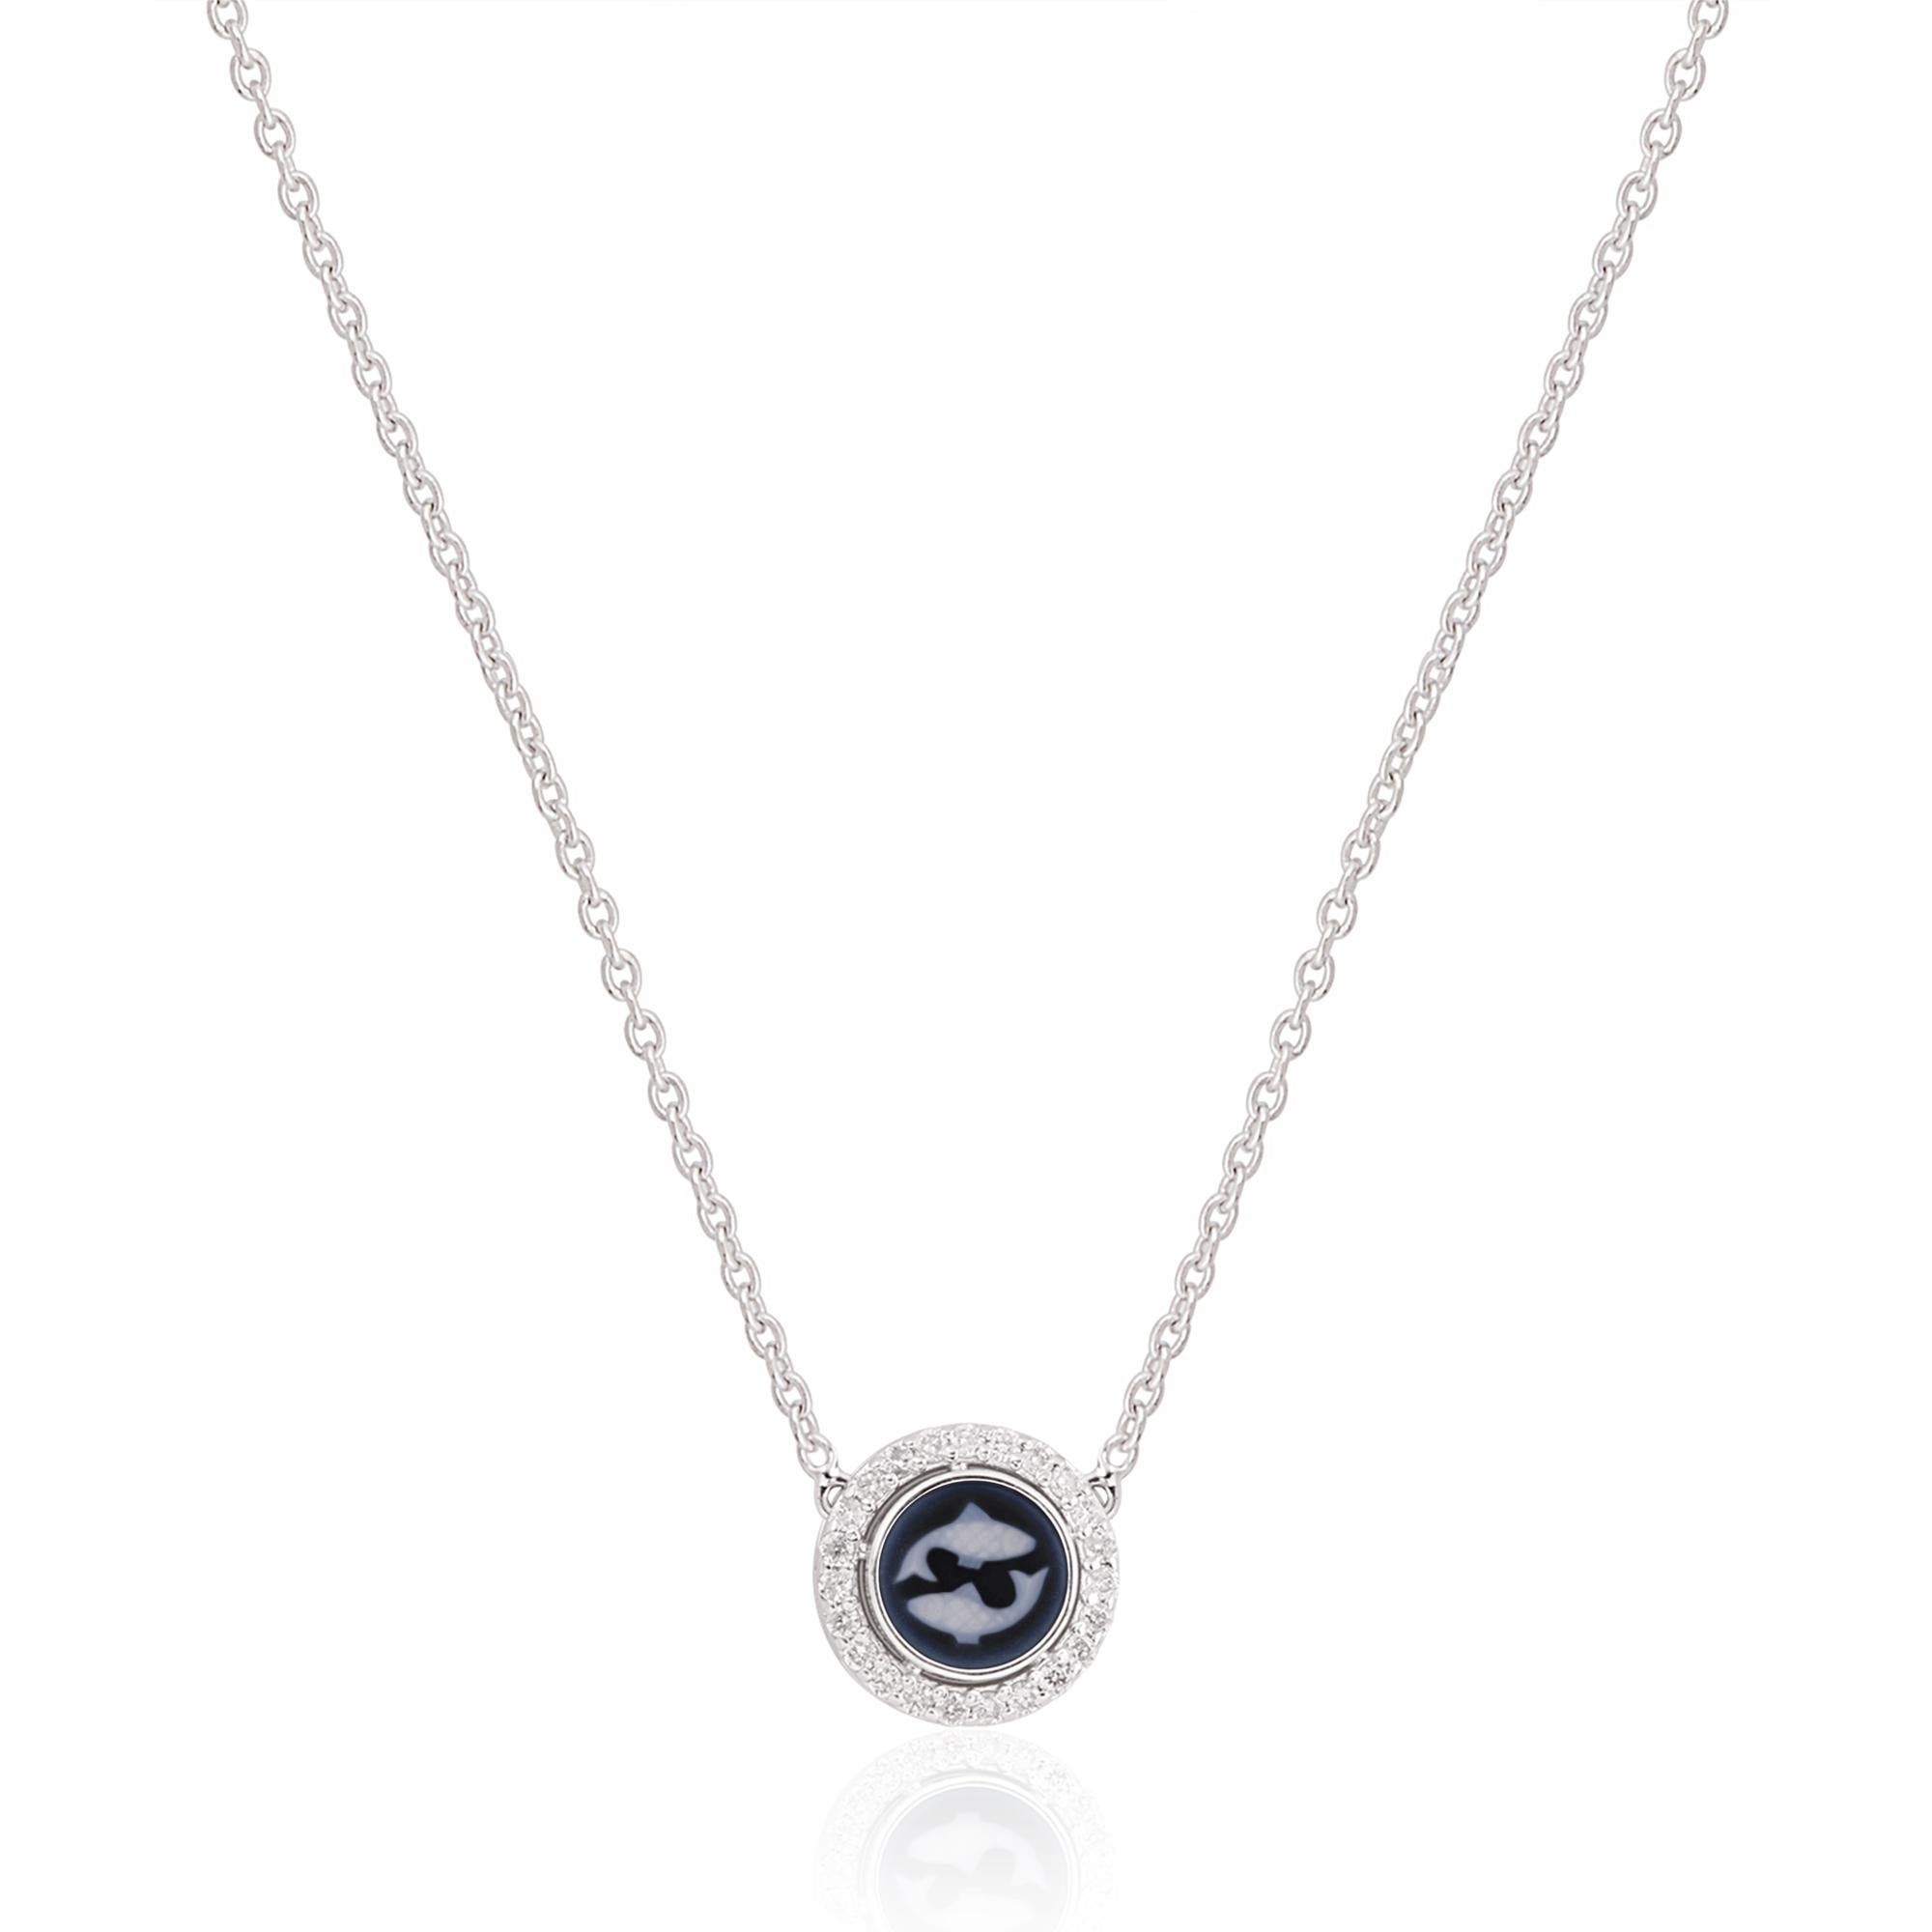 This Pisces zodiac pendant necklace is not only a beautiful personal accessory but also a meaningful gift for those born under this sign. It embodies the traits of empathy, creativity, and spiritual depth, making it a cherished piece of jewelry that